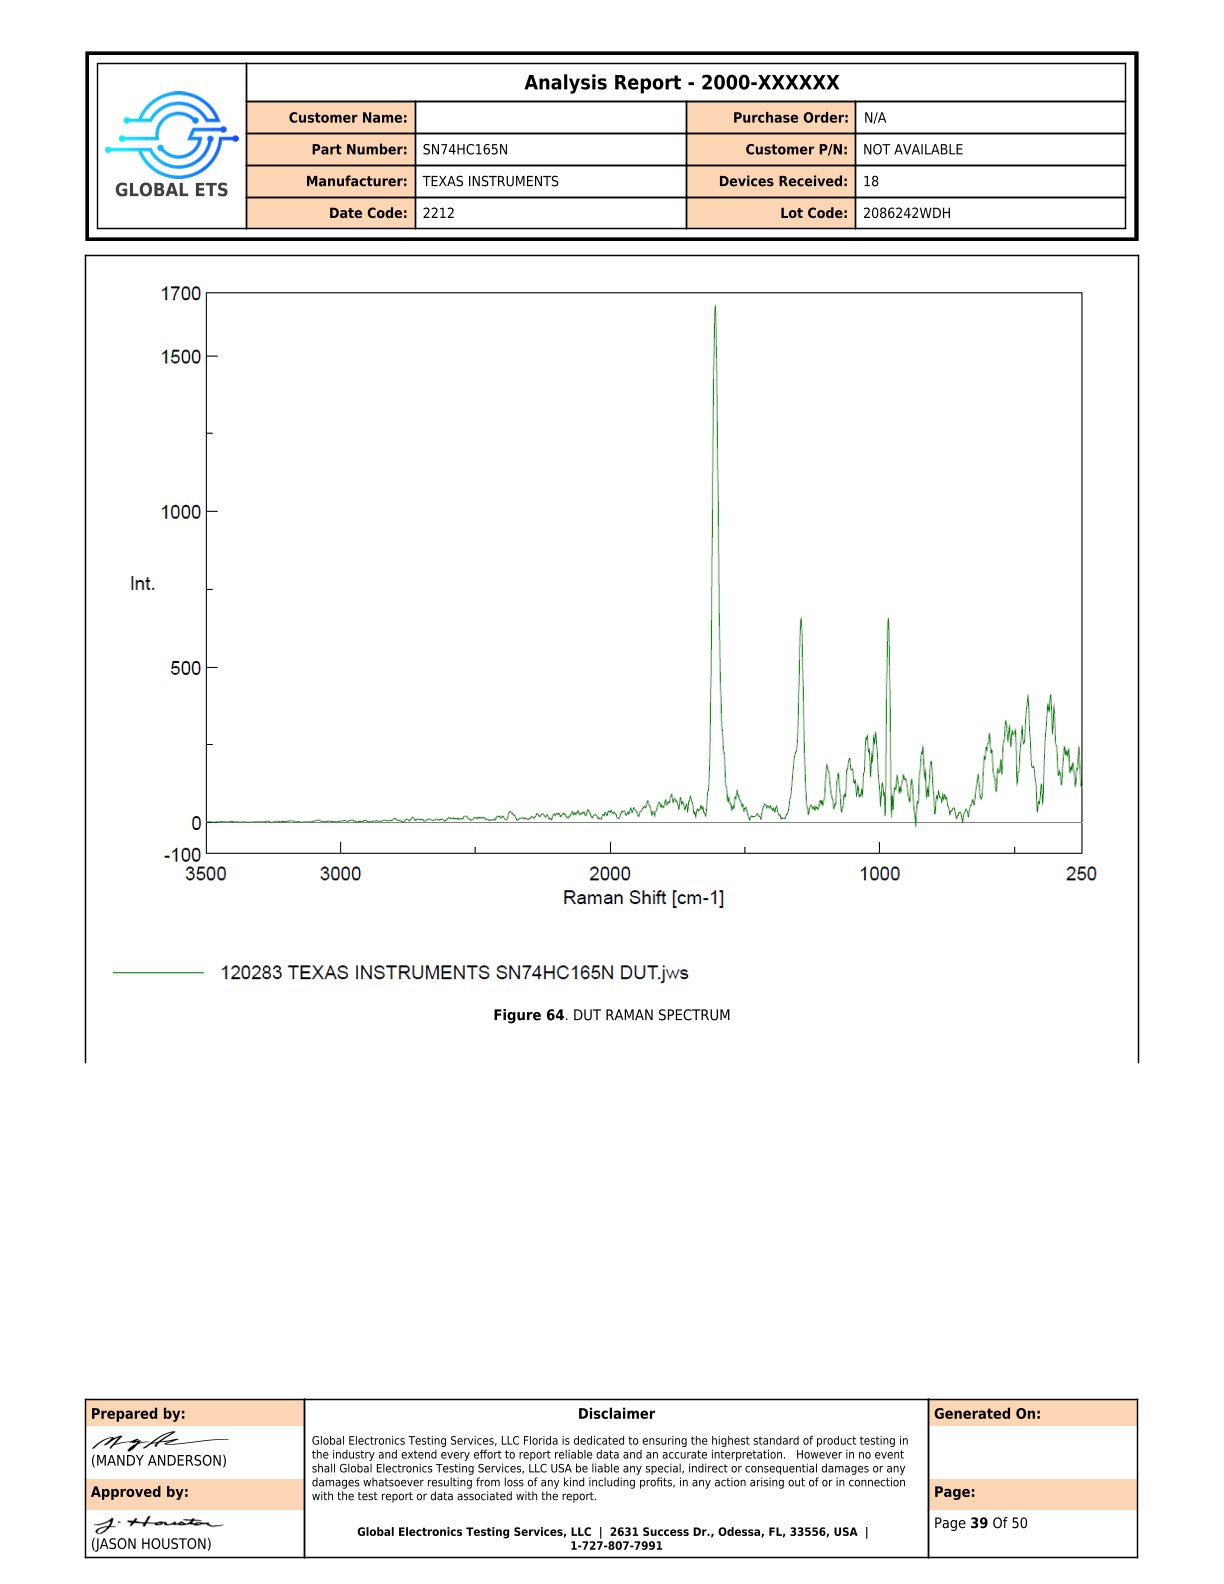 Graph of a Raman spectrum analysis report by Global ETS for a Texas Instruments part number SN74HC165N, displaying peaks in intensity over a range of Raman shift values.